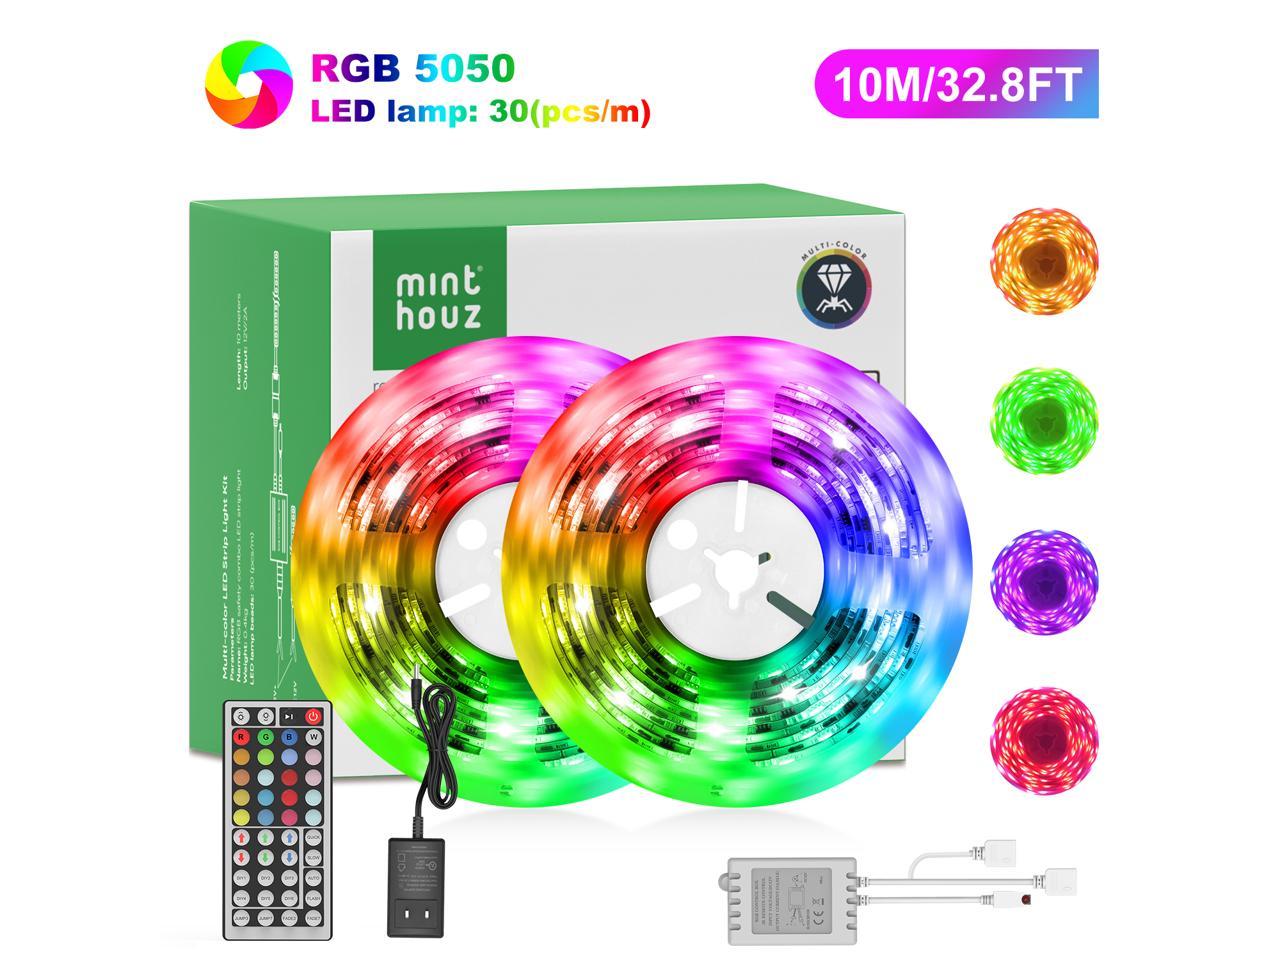 65.6ft RGB Led Strip Brightness Dimming Led Lights for Bedroom,Cabinet,Doors,Windows or Stairs in Kitchen,Ceiling or Home Decor ECOLOR LED Strip Lights with Remote and Control Box